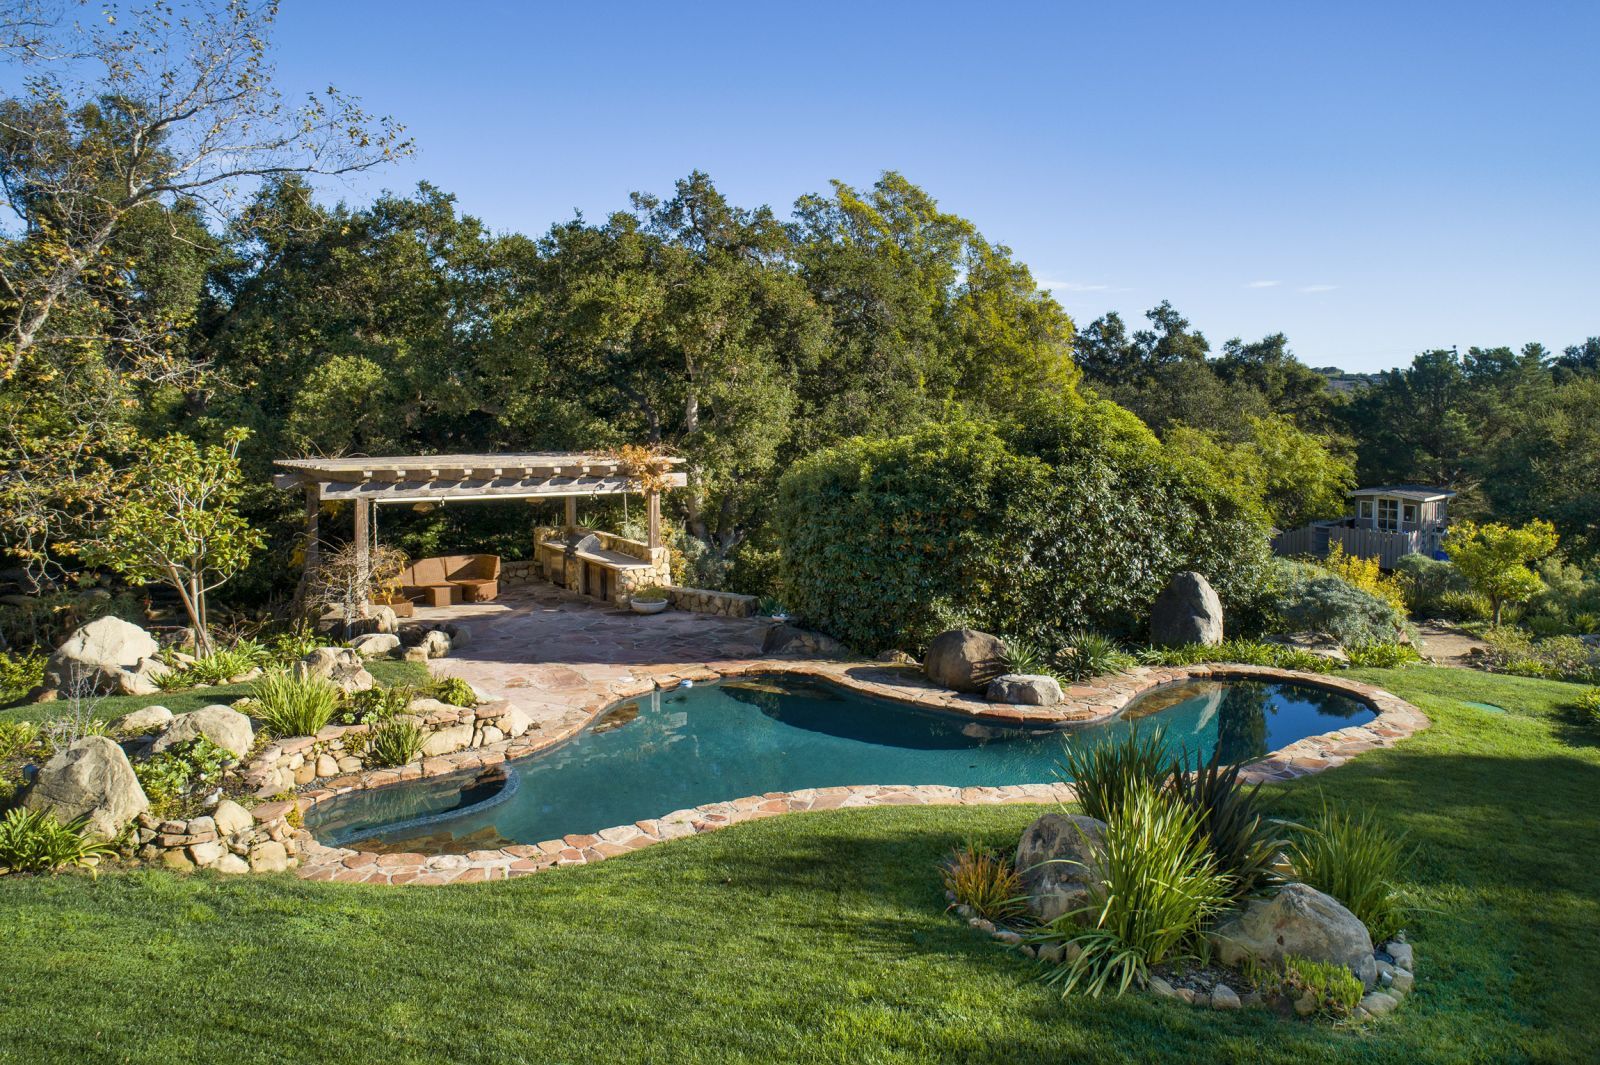 The lush grounds of a Montecito estate, with a free-form pool, cabana, mature trees, and a hint of ocean view